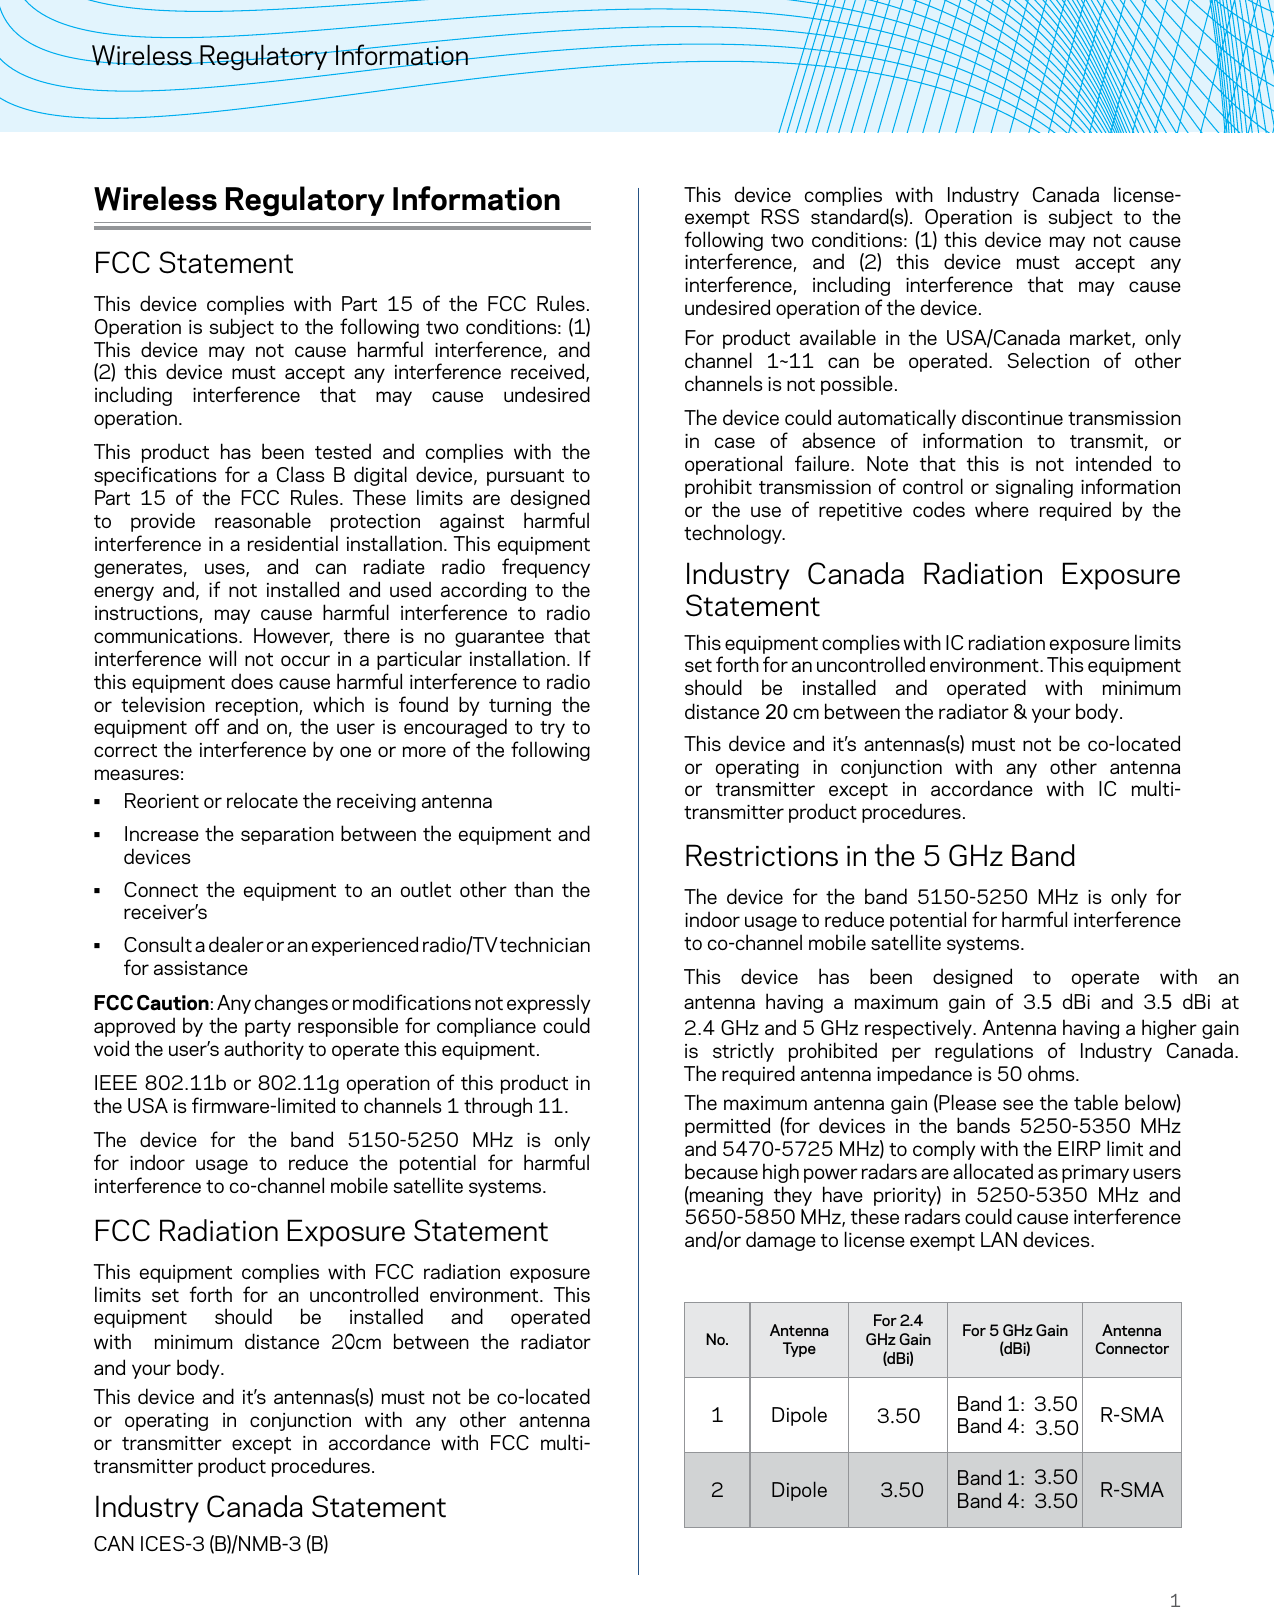 1Wireless Regulatory InformationWireless Regulatory InformationFCC StatementThis device complies with Part 15 of the FCC Rules. Operation is subject to the following two conditions: (1) This device may not cause harmful interference, and (2) this device must accept any interference received, including interference that may cause undesired operation.This product has been tested and complies with the specifications for a Class B digital device, pursuant to Part 15 of the FCC Rules. These limits are designed to provide reasonable protection against harmful interference in a residential installation. This equipment generates, uses, and can radiate radio frequency energy and, if not installed and used according to the instructions, may cause harmful interference to radio communications. However, there is no guarantee that interference will not occur in a particular installation. If this equipment does cause harmful interference to radio or television reception, which is found by turning the equipment off and on, the user is encouraged to try to correct the interference by one or more of the following measures: • Reorient or relocate the receiving antenna • Increase the separation between the equipment anddevices • Connect the equipment to an outlet other than thereceiver’s • Consult a dealer or an experienced radio/TV technician for assistanceFCC Caution: Any changes or modifications not expressly approved by the party responsible for compliance could void the user’s authority to operate this equipment.IEEE 802.11b or 802.11g operation of this product in the USA is firmware-limited to channels 1 through 11.The device for the band 5150-5250 MHz is only for indoor usage to reduce the potential for harmful interference to co-channel mobile satellite systems.FCC Radiation Exposure StatementThis equipment complies with FCC radiation exposure limits set forth for an uncontrolled environment. This equipment  should  be  installed  and  operated with  minimum  distance  20cm  between  the  radiator and your body.This device and it’s antennas(s) must not be co-located or operating in conjunction with any other antenna or transmitter except in accordance with FCC multi-transmitter product procedures.Industry Canada StatementCAN ICES-3 (B)/NMB-3 (B)This device complies with Industry Canada license-exempt RSS standard(s). Operation is subject to the following two conditions: (1) this device may not cause interference, and (2) this device must accept any interference, including interference that may cause undesired operation of the device.For product available in the USA/Canada market, only channel 1~11 can be operated. Selection of other channels is not possible.The device could automatically discontinue transmission in case of absence of information to transmit, or operational failure. Note that this is not intended to prohibit transmission of control or signaling information or the use of repetitive codes where required by the technology.Industry Canada Radiation Exposure StatementThis equipment complies with IC radiation exposure limits set forth for an uncontrolled environment. This equipment should  be  installed  and  operated  with  minimum distance 20 cm between the radiator &amp; your body.This device and it’s antennas(s) must not be co-located or operating in conjunction with any other antenna or transmitter except in accordance with IC multi-transmitter product procedures.Restrictions in the 5 GHz BandThe device for the band 5150-5250 MHz is only for indoor usage to reduce potential for harmful interference to co-channel mobile satellite systems.This  device  has  been  designed  to  operate  with  an antenna having a maximum gain of 3.5 dBi and 3.5 dBi at  2.4 GHz and 5 GHz respectively. Antenna having a higher gain is  strictly prohibited per  regulations  of  Industry  Canada. The required antenna impedance is 50 ohms.The maximum antenna gain (Please see the table below) permitted (for devices in the bands 5250-5350 MHz and 5470-5725 MHz) to comply with the EIRP limit and because high power radars are allocated as primary users (meaning they have priority) in 5250-5350 MHz and 5650-5850 MHz, these radars could cause interference and/or damage to license exempt LAN devices.No. Antenna TypeFor 2.4 GHz Gain (dBi)For 5 GHz Gain (dBi)Antenna Connector1 Dipole Band 1:  Band 4:  R-SMA2 Dipole Band 1:  Band 4:  R-SMA3.503.503.503.503.503.50